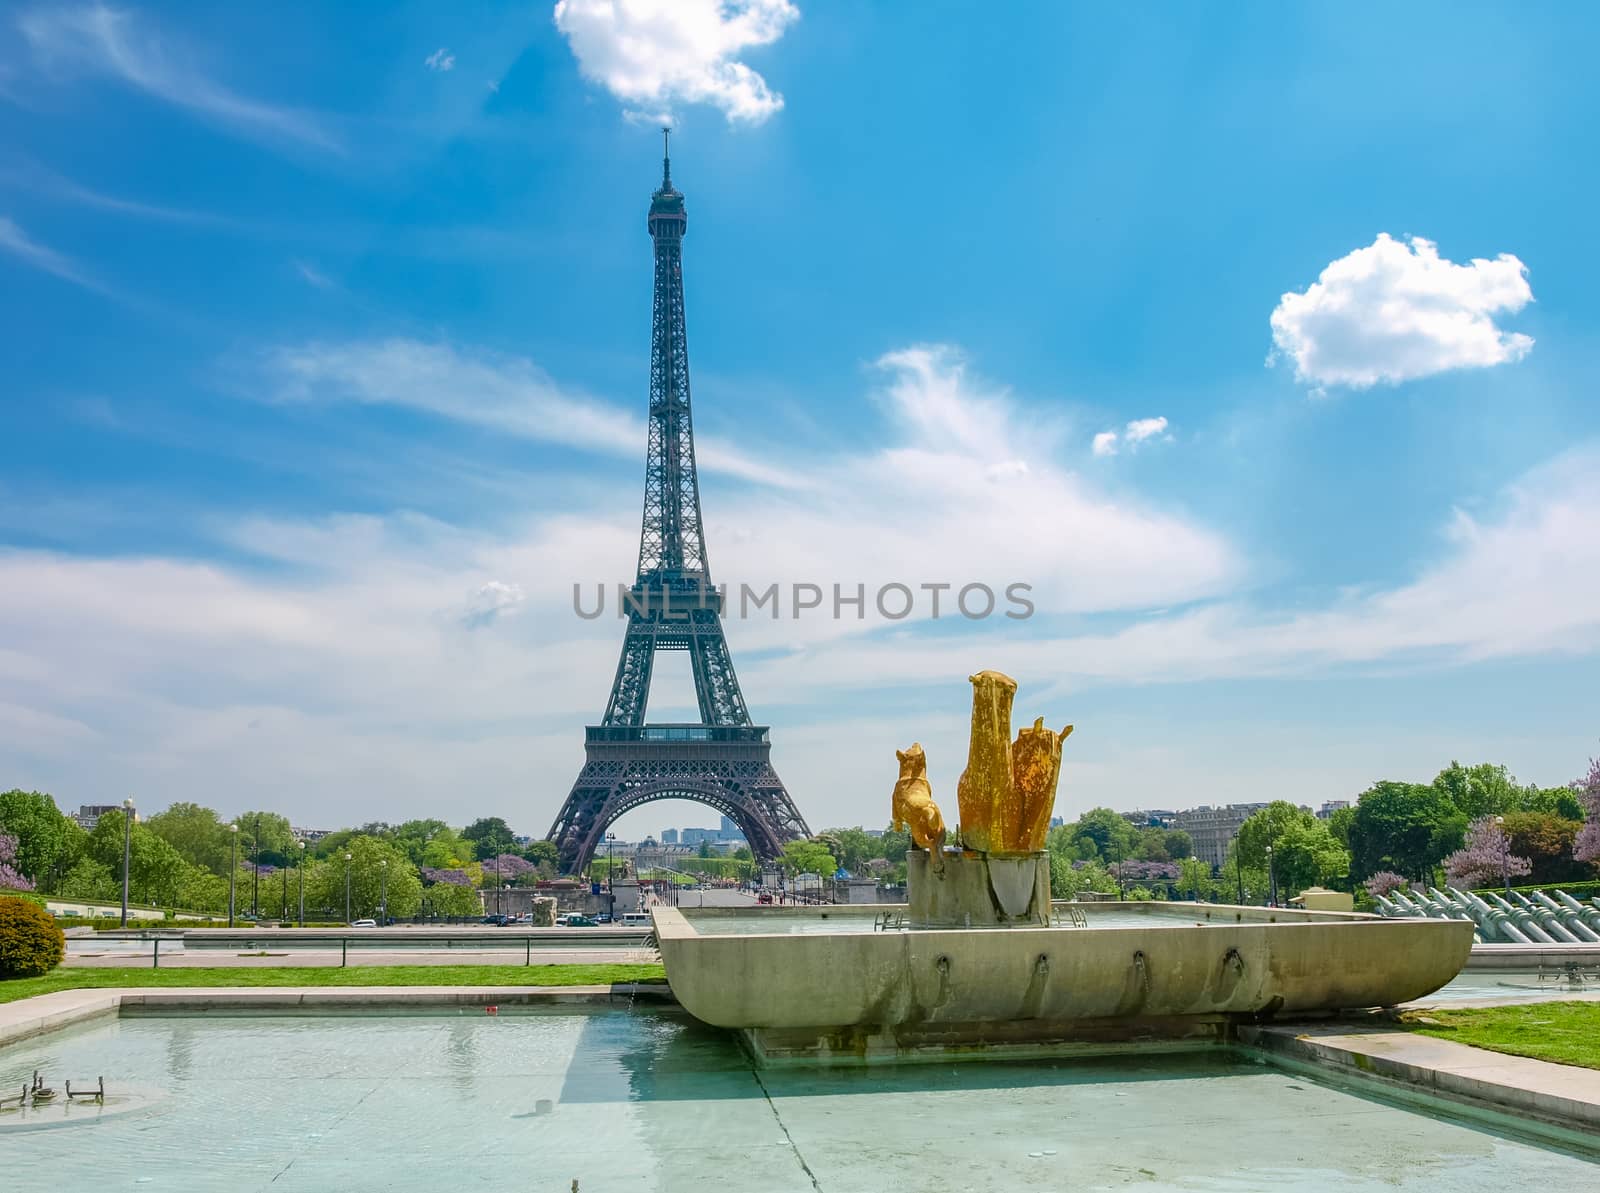 Eiffel Tower from the Trocadero Square in Paris by anmbph